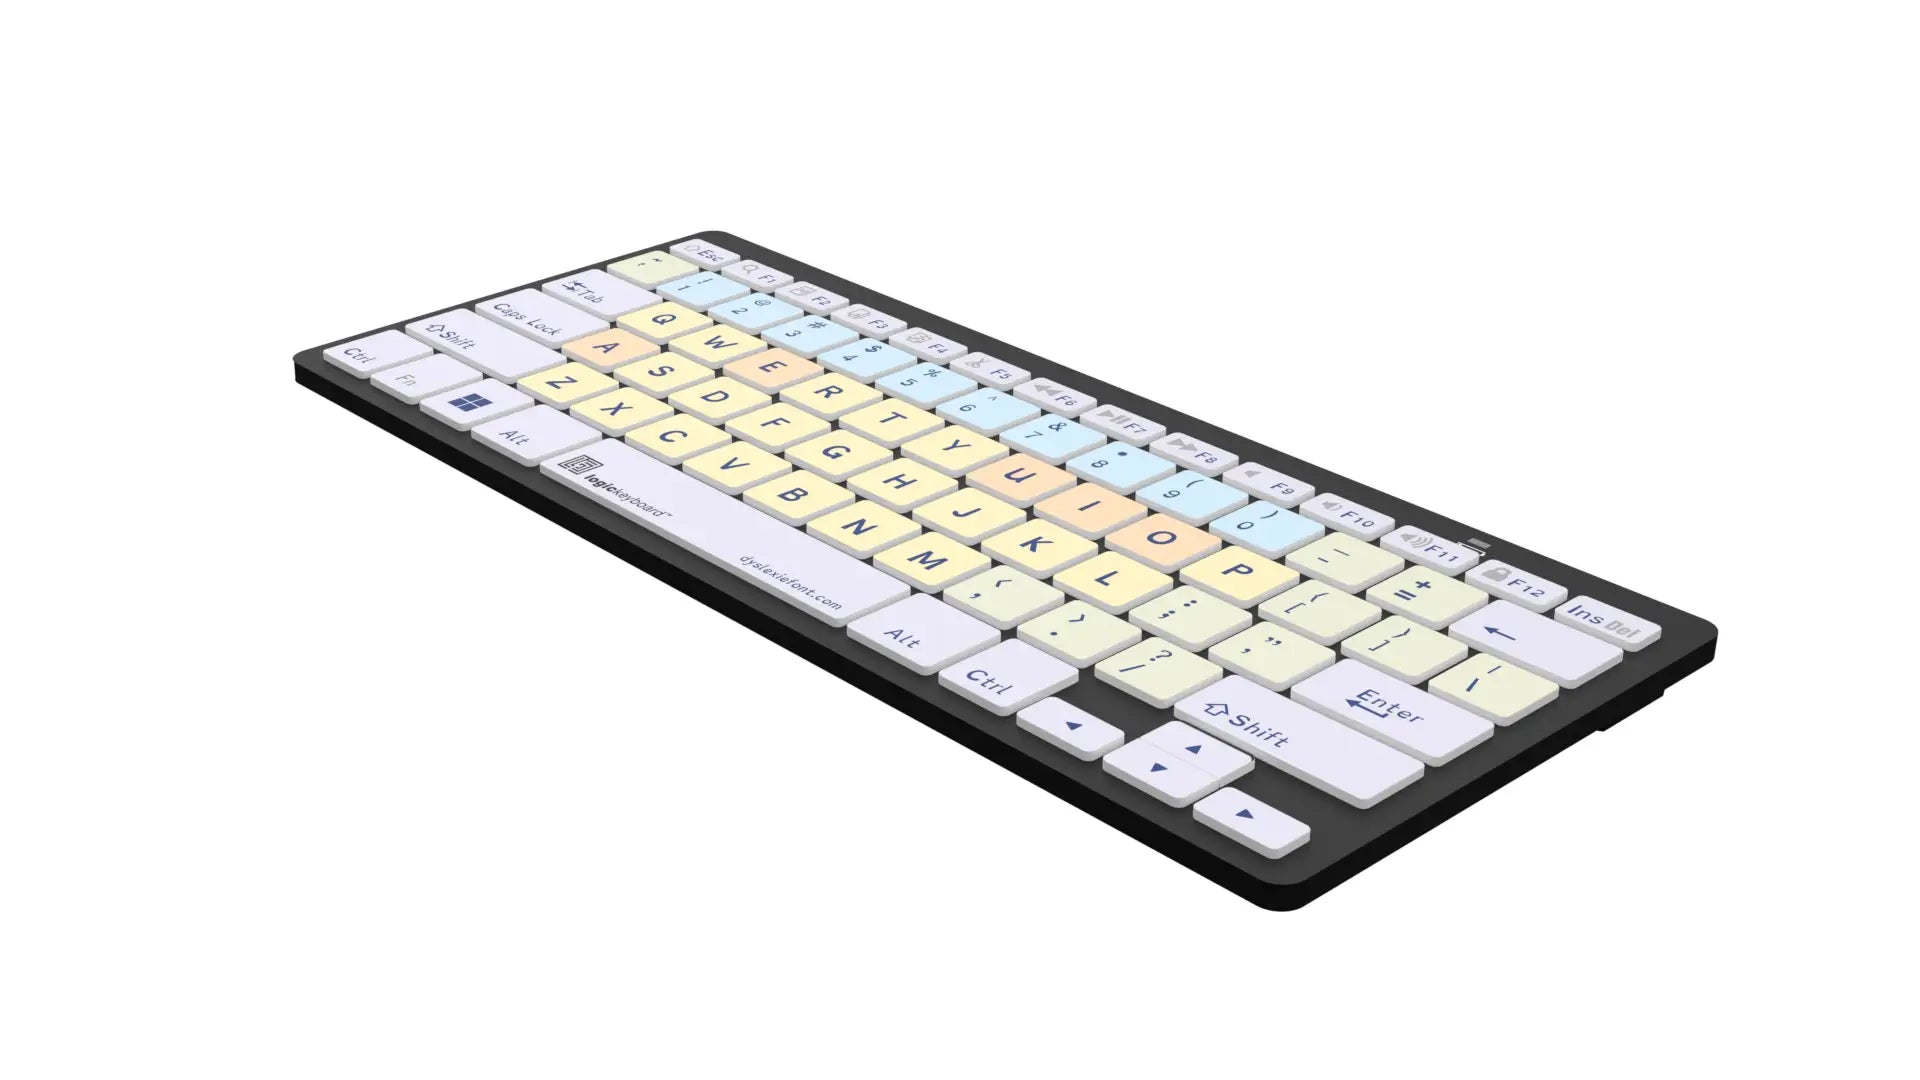 Right angle image of the Dyslexie Mini Bluetooth PC dyslexia Keyboard from LogicKeyboard.